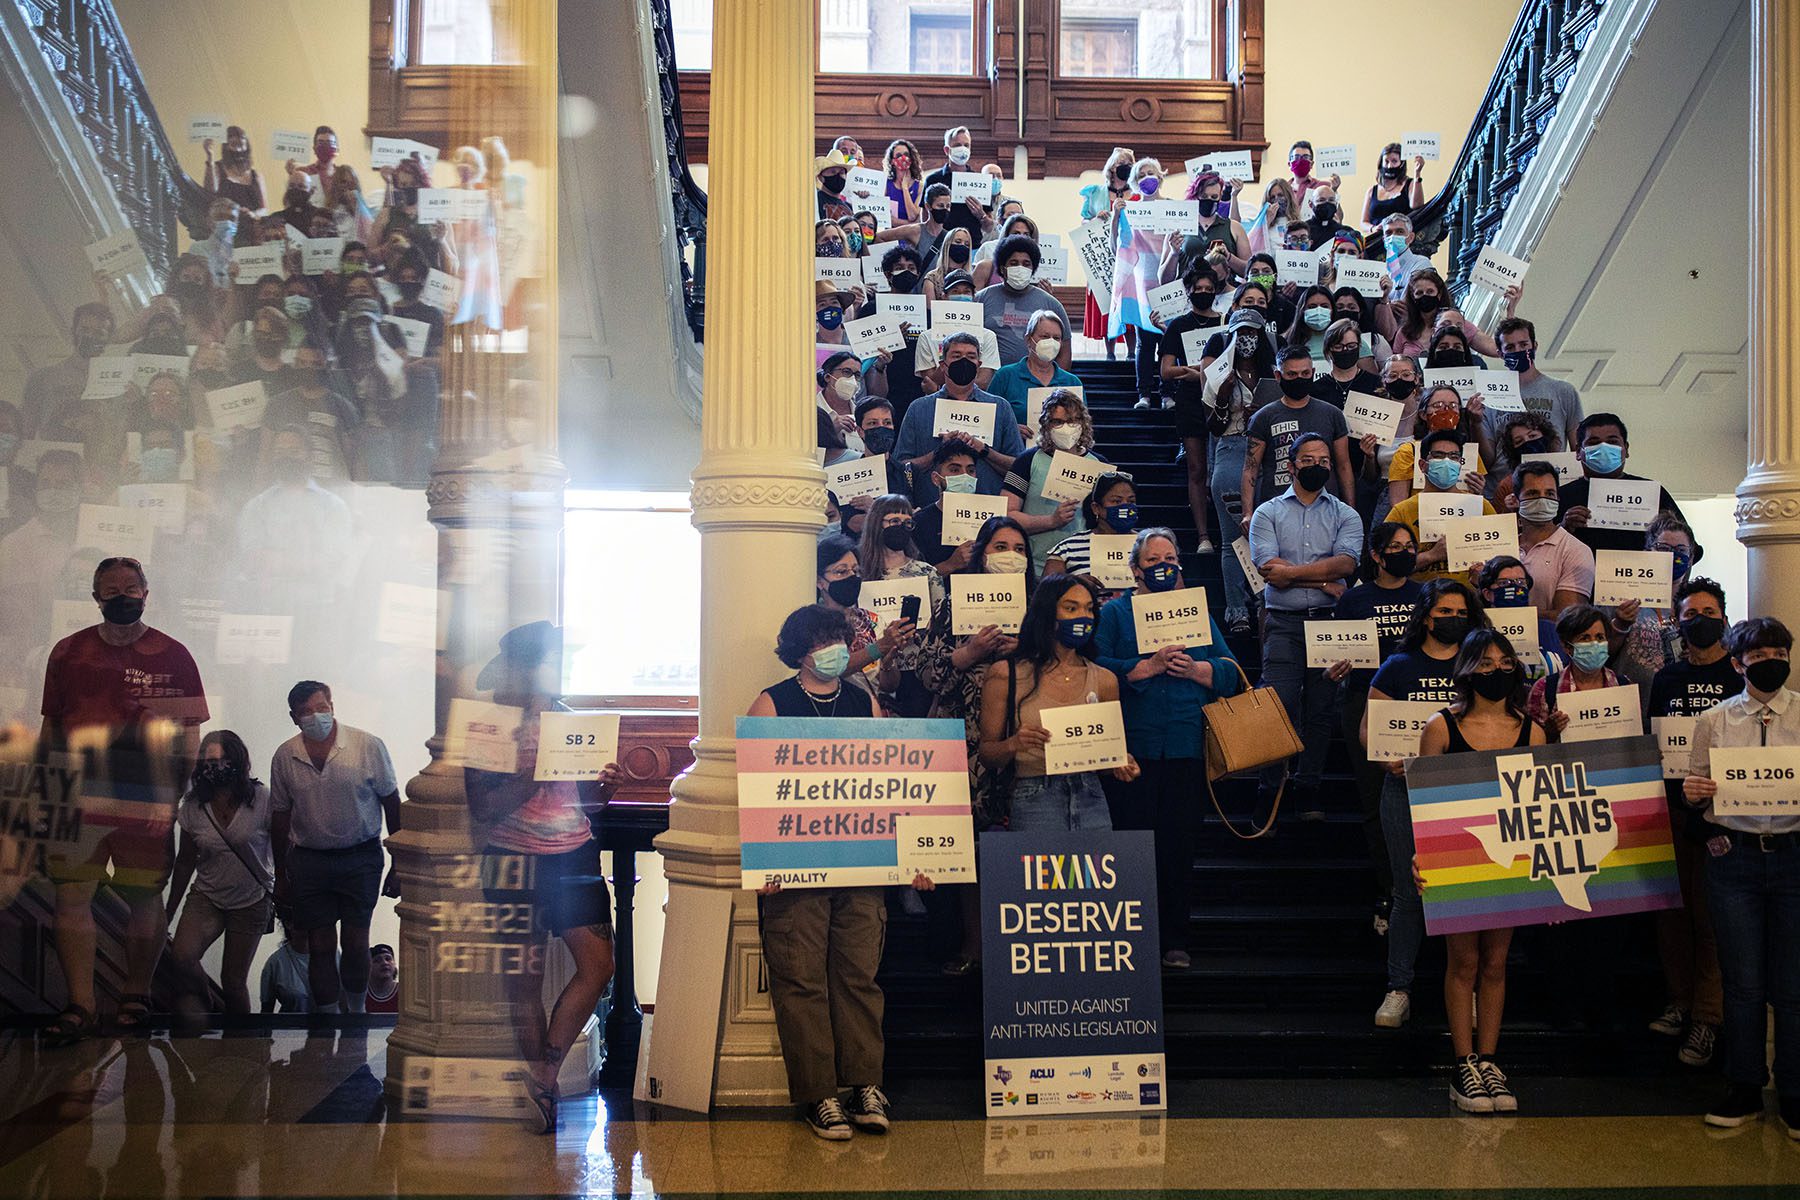 LGBTQ+ rights supporters inside the Texas State Capitol. Many hold signs, some read "Y'all Means All," "#LetKidsPlay.